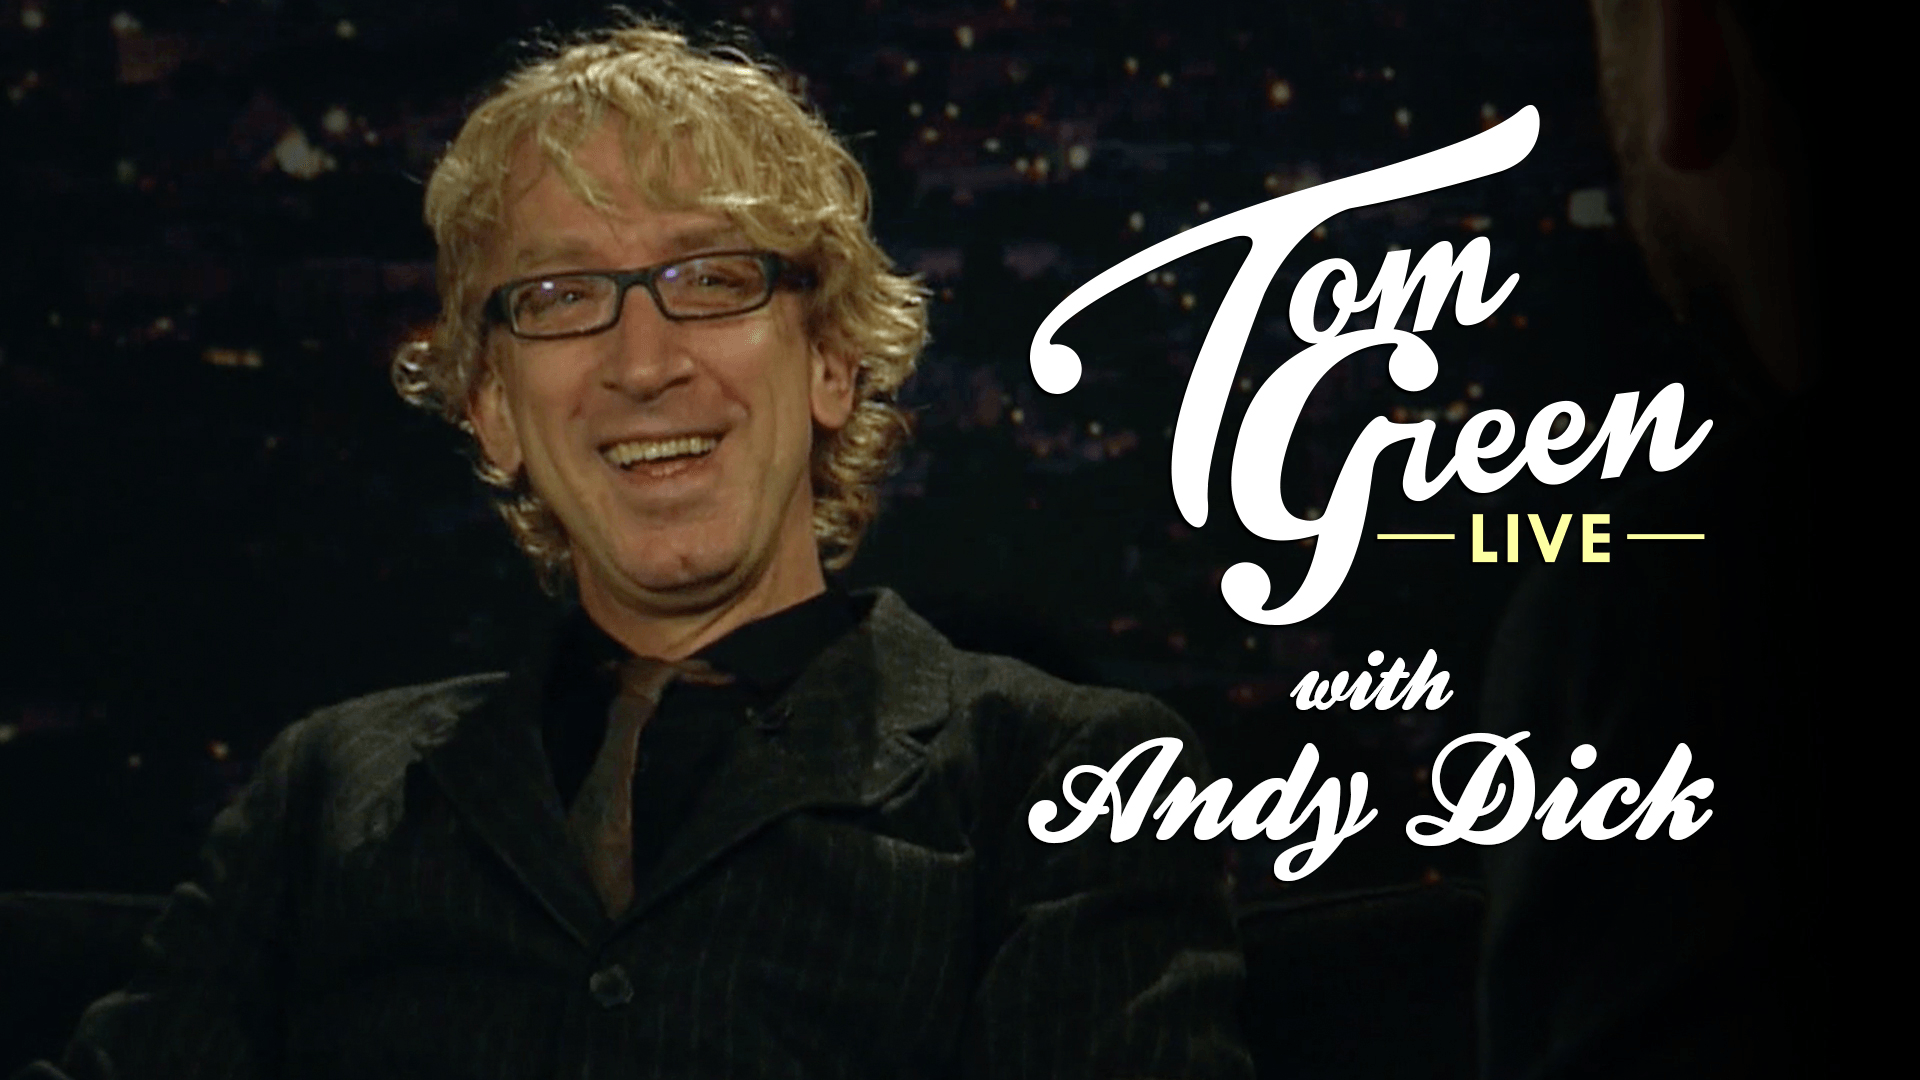 Andy dick tv show